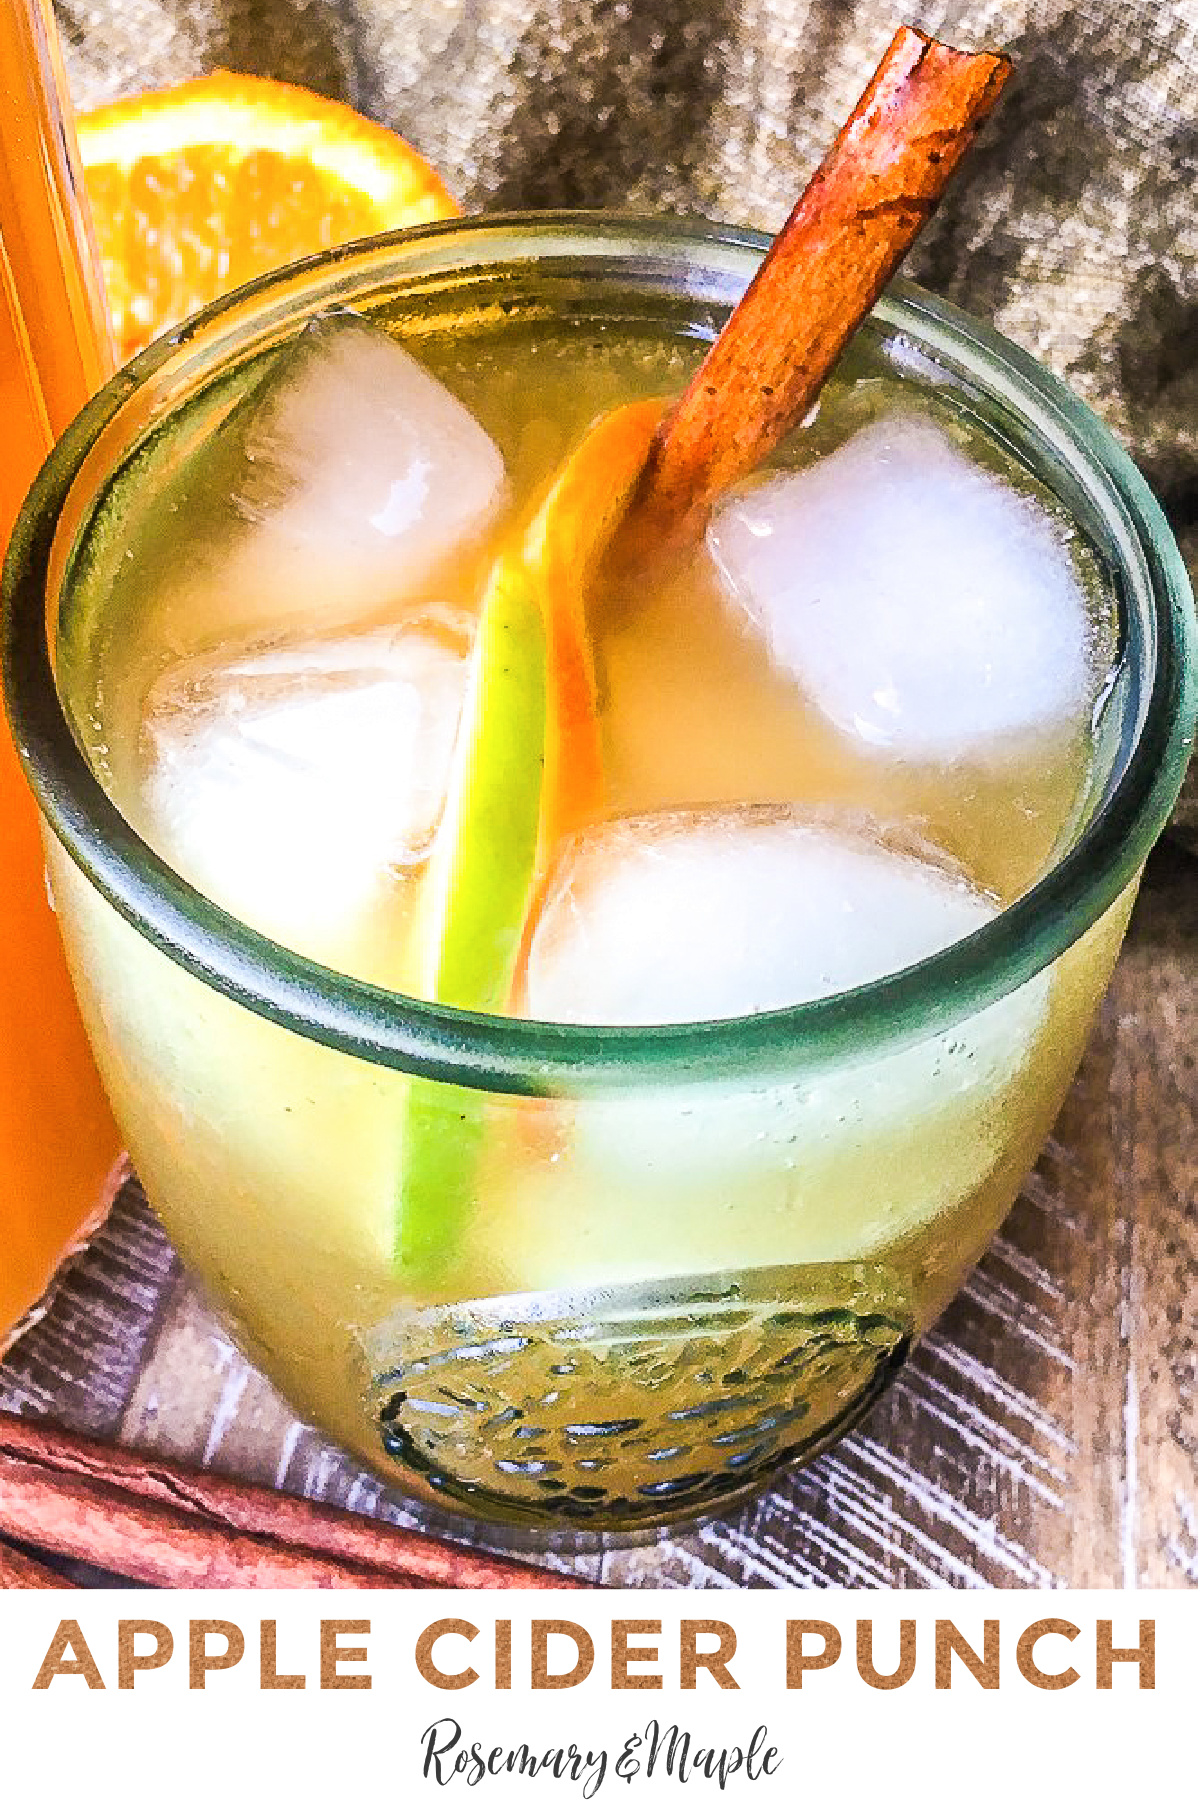 Need a refreshing drink for your Thanksgiving feast or holiday party? This sparkling apple cider punch recipe is a perfect autumn drink!